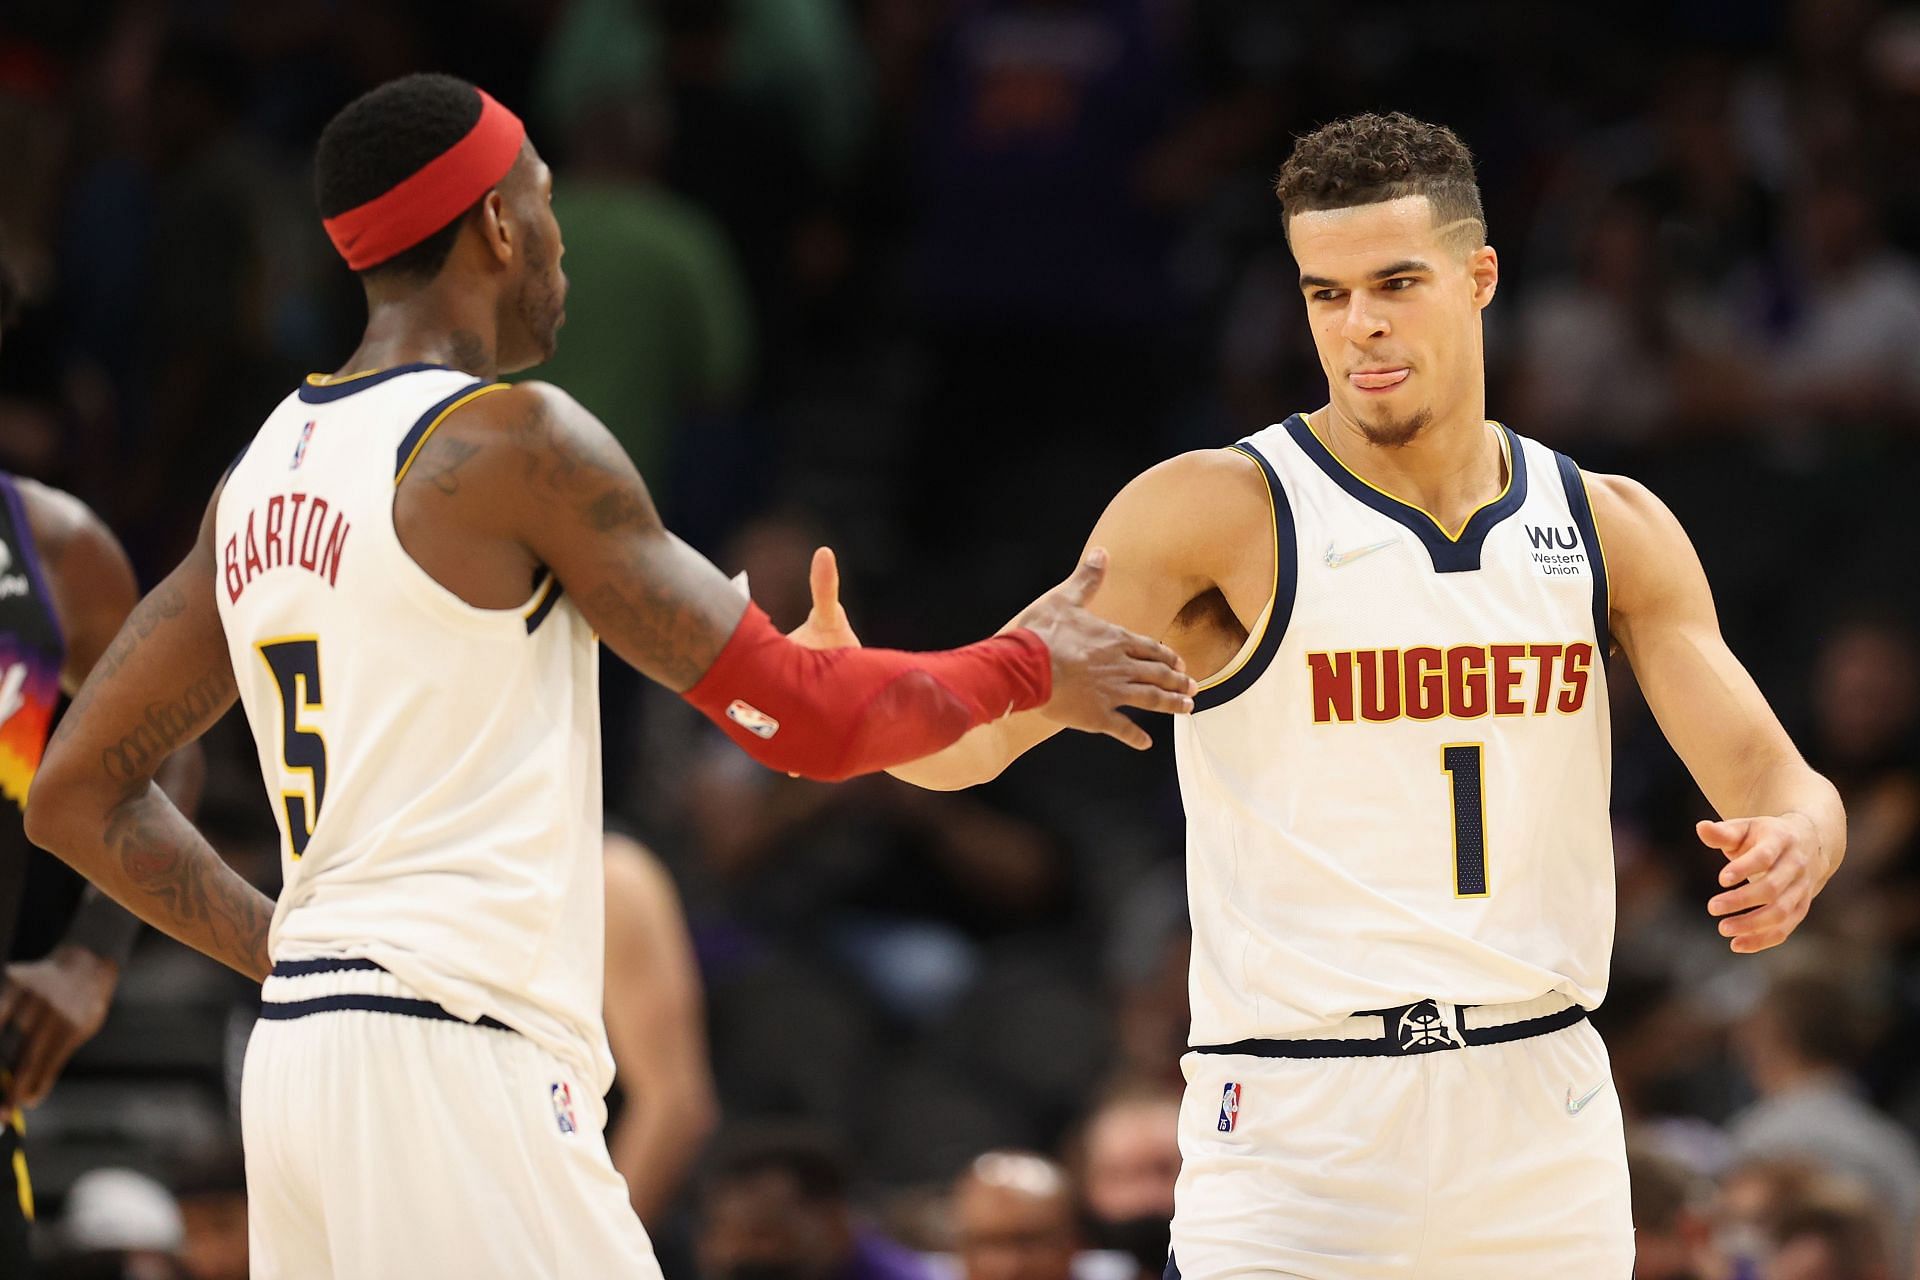 Denver Nuggets forward Michael Porter Jr. will be missed in the rotation